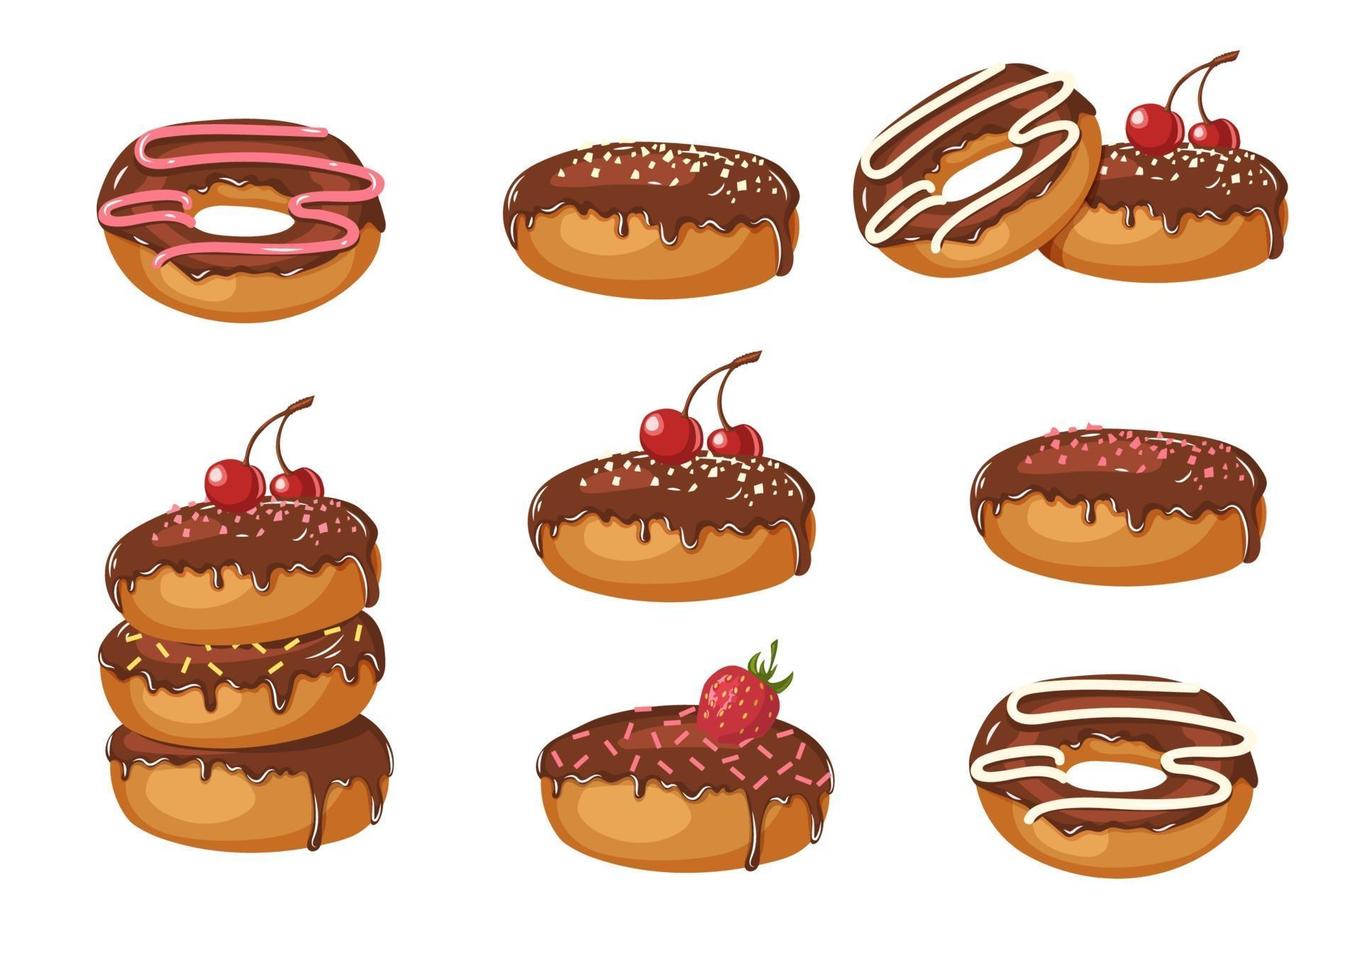 Set of Vector Sweet chocolate glazed donuts with powder, cherries, strawberries and chocolate cream isolated on white. Food design. Illustration for holidays, birthdays, banners, patterns.